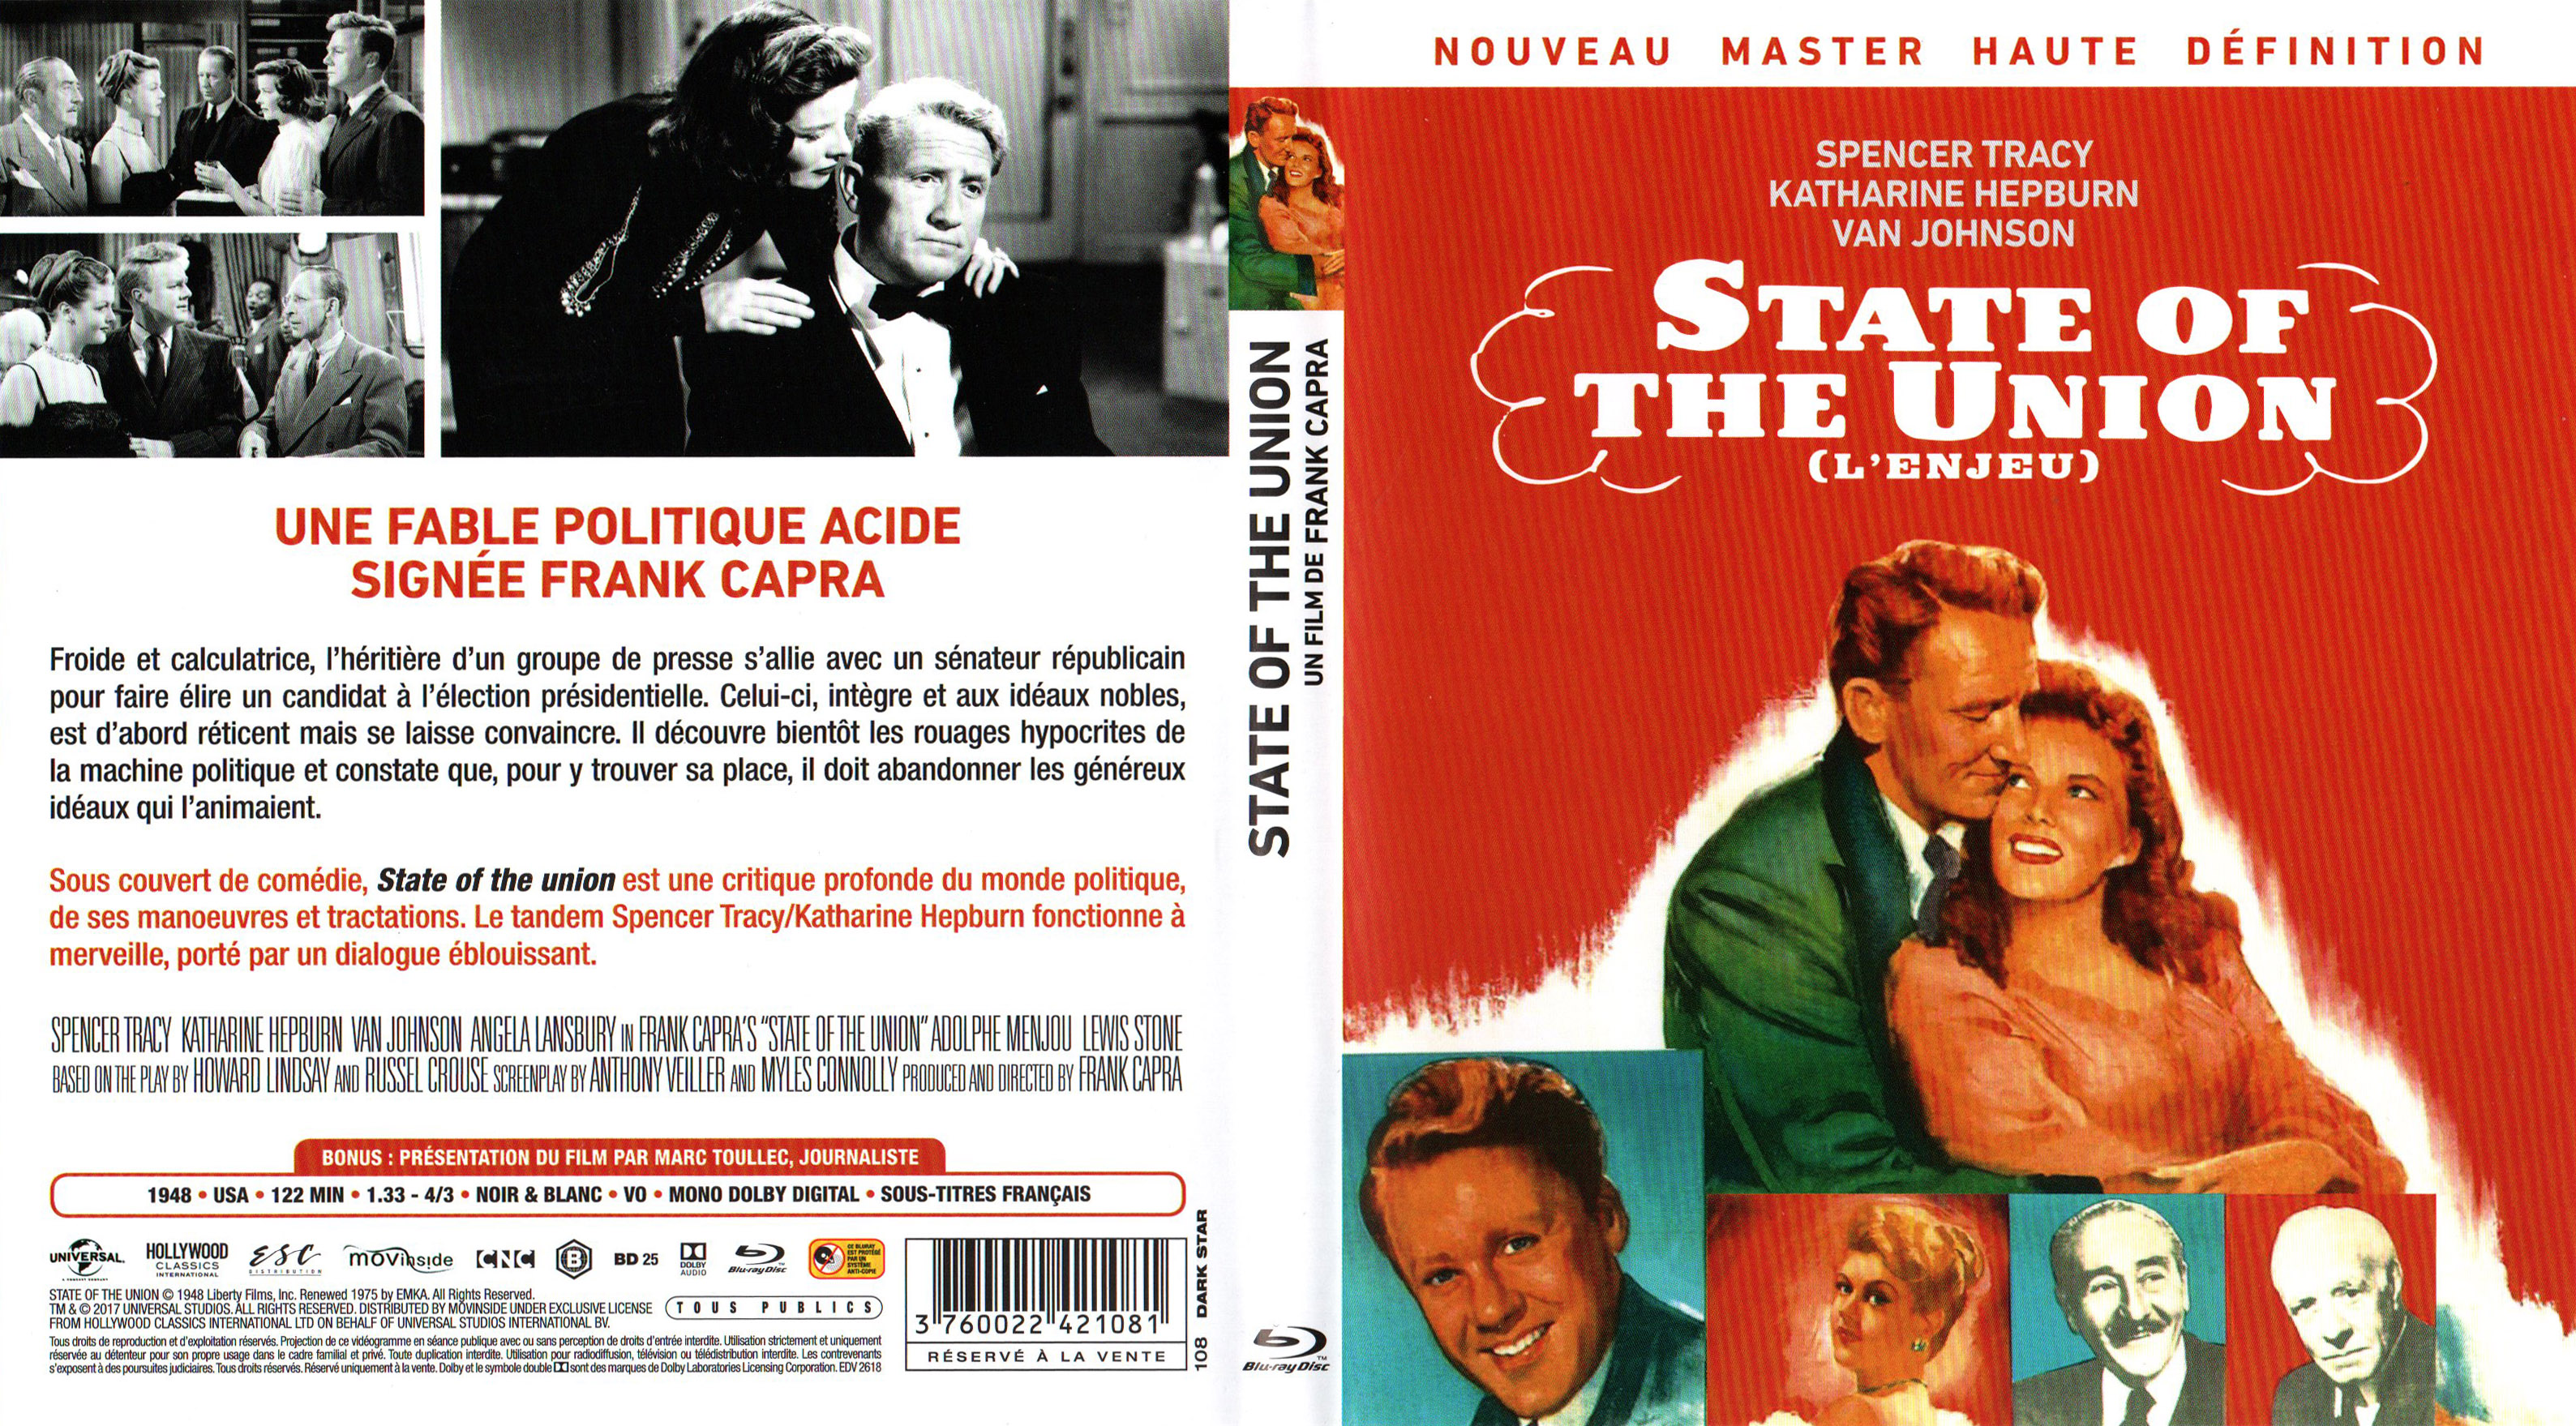 Jaquette DVD State of the Union - L